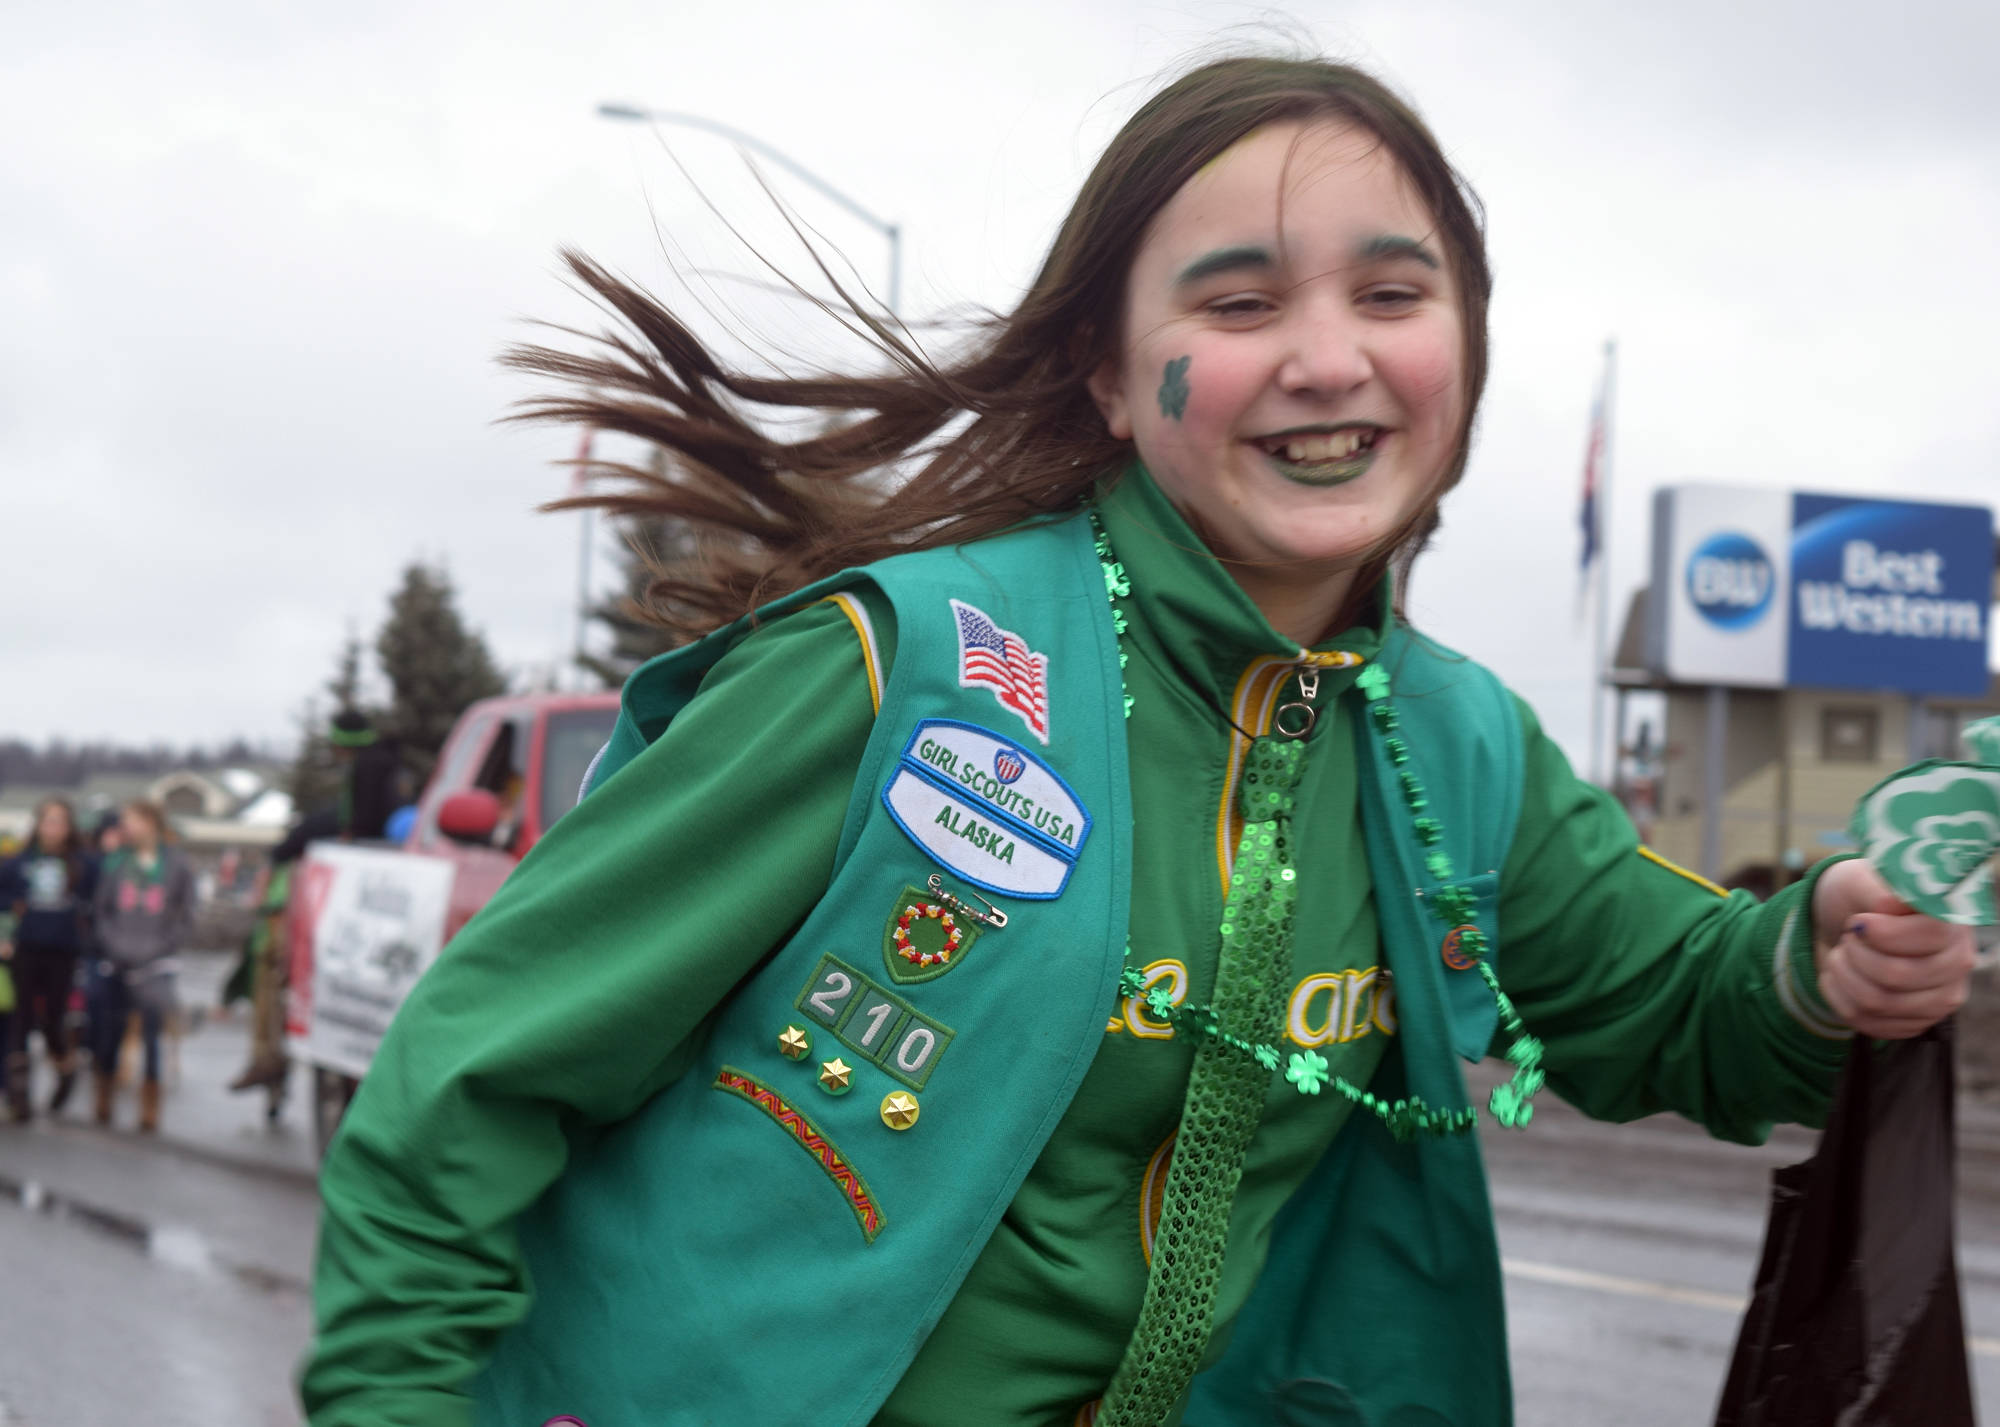 Caitlyn Crapps of Kenai runs along the St. Patrick’s Day parade route while marching with her girl scouts troop Saturday, March 17. (Photo by Kat Sorensen/Peninsula Clarion)